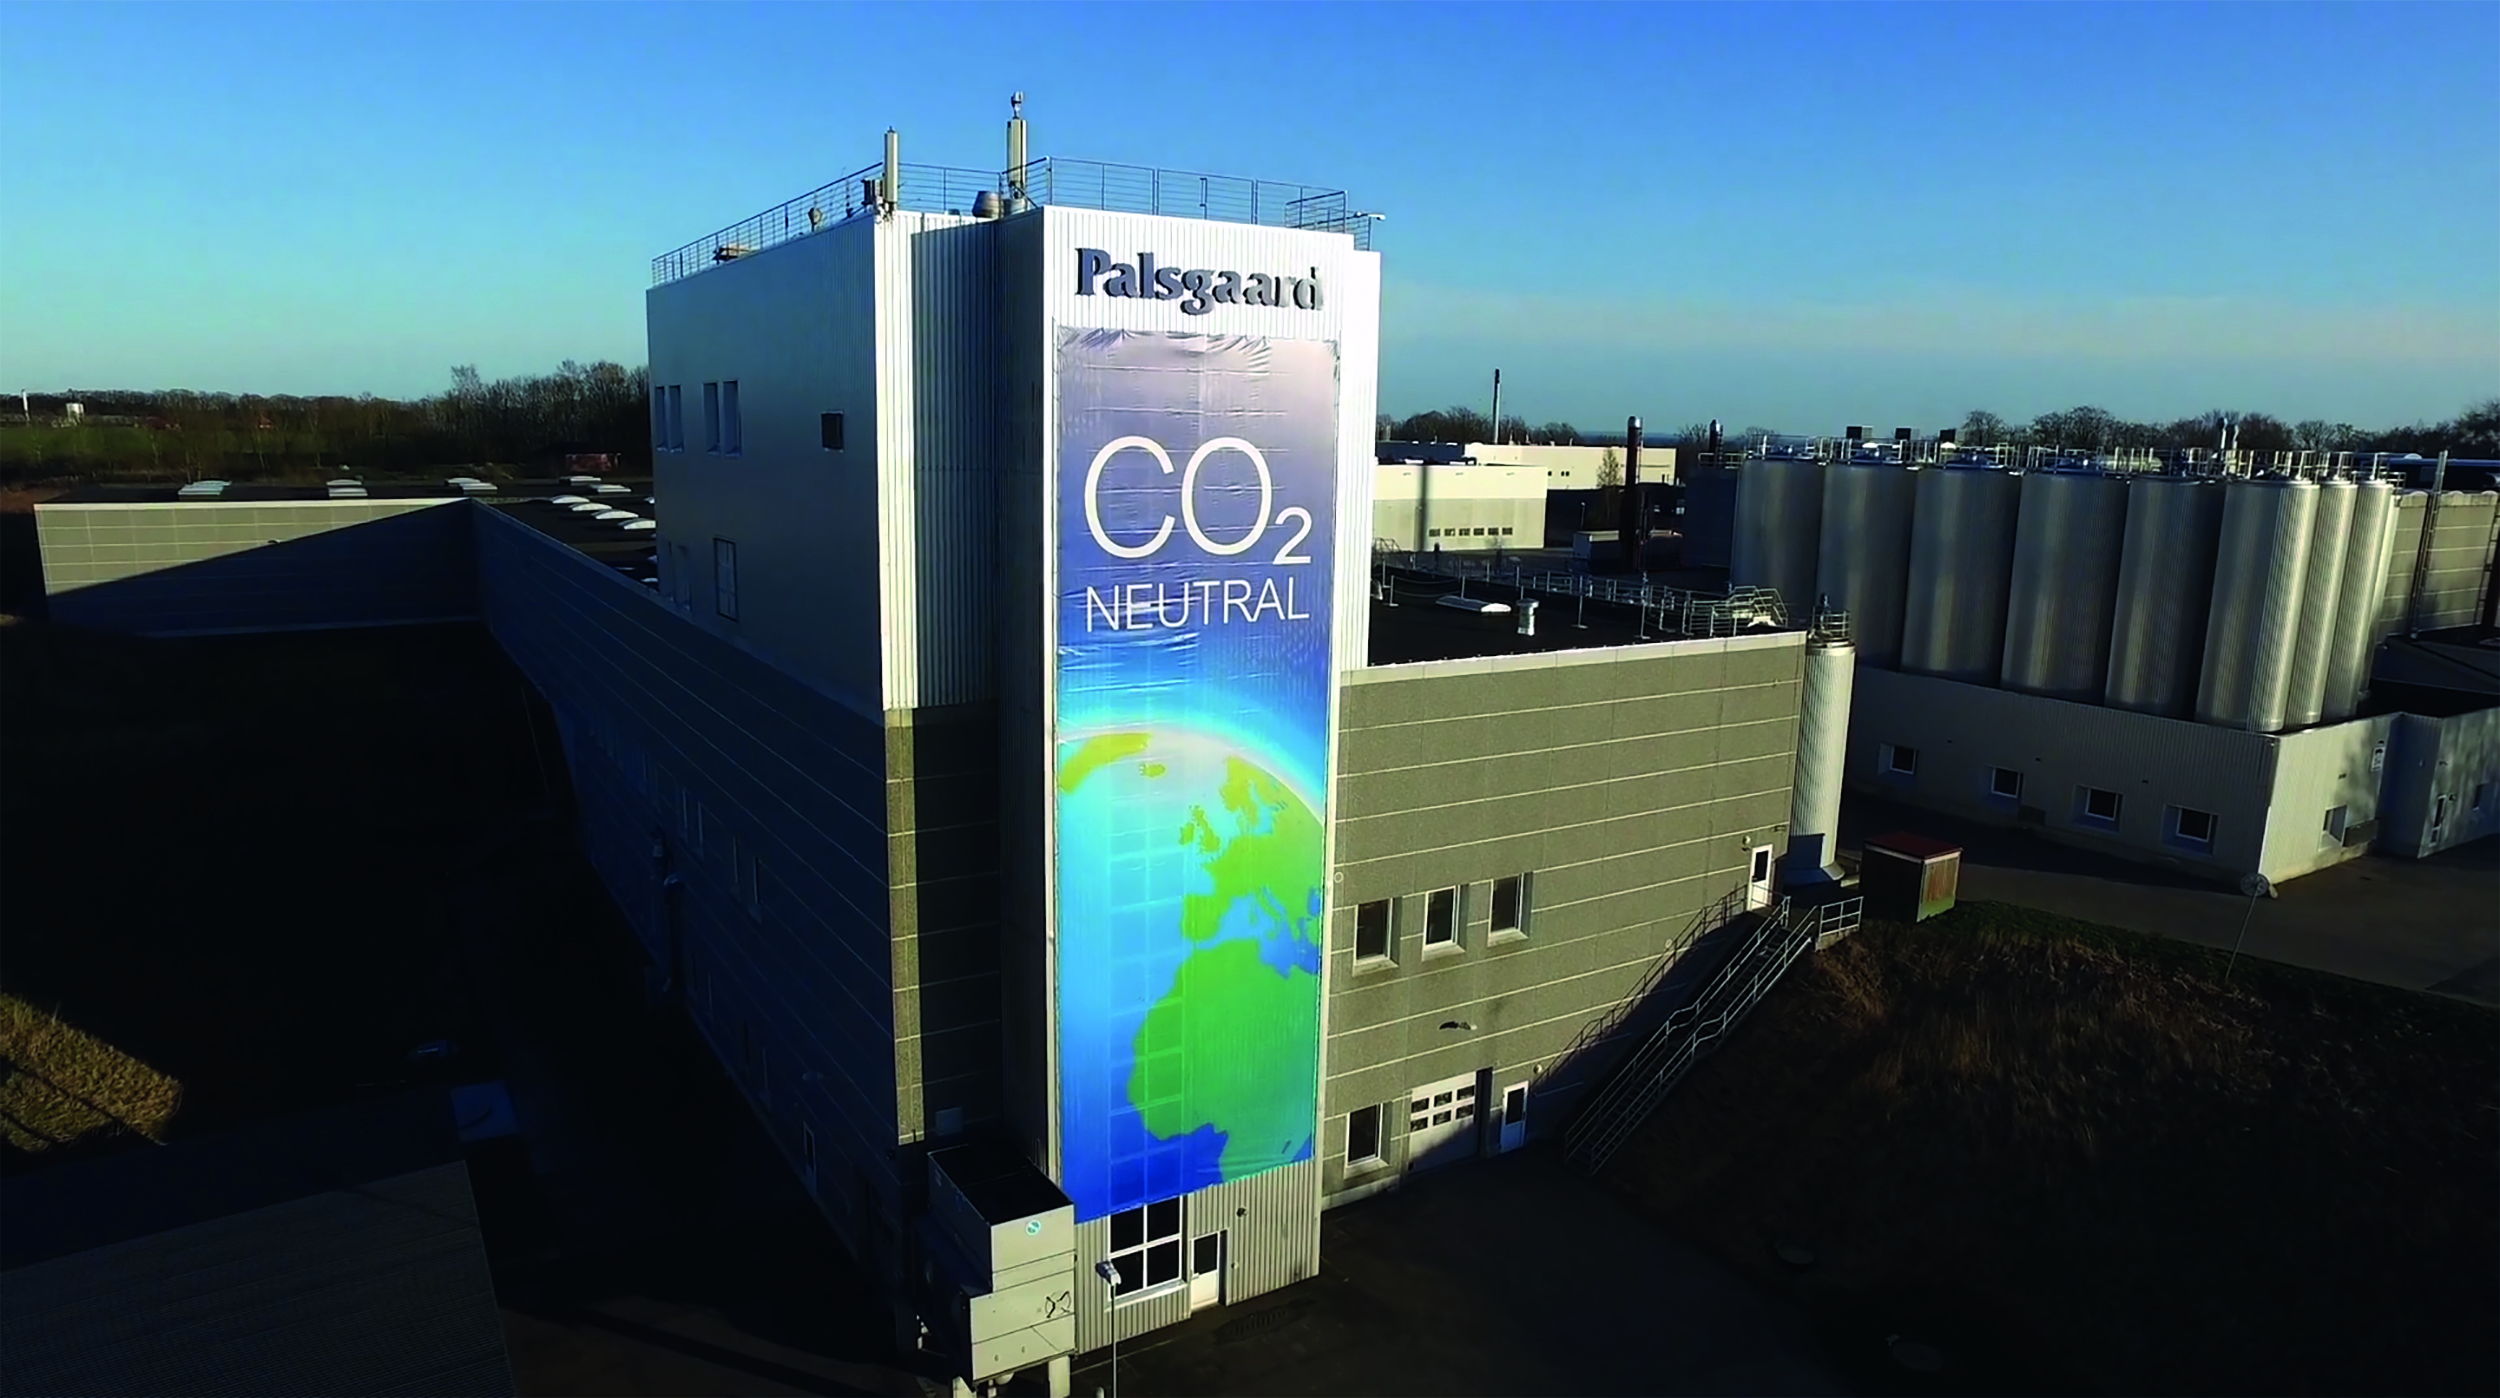 Palsgaard has won the Sustainability Champion prize at the Food Ingredients Europe Innovation Awards